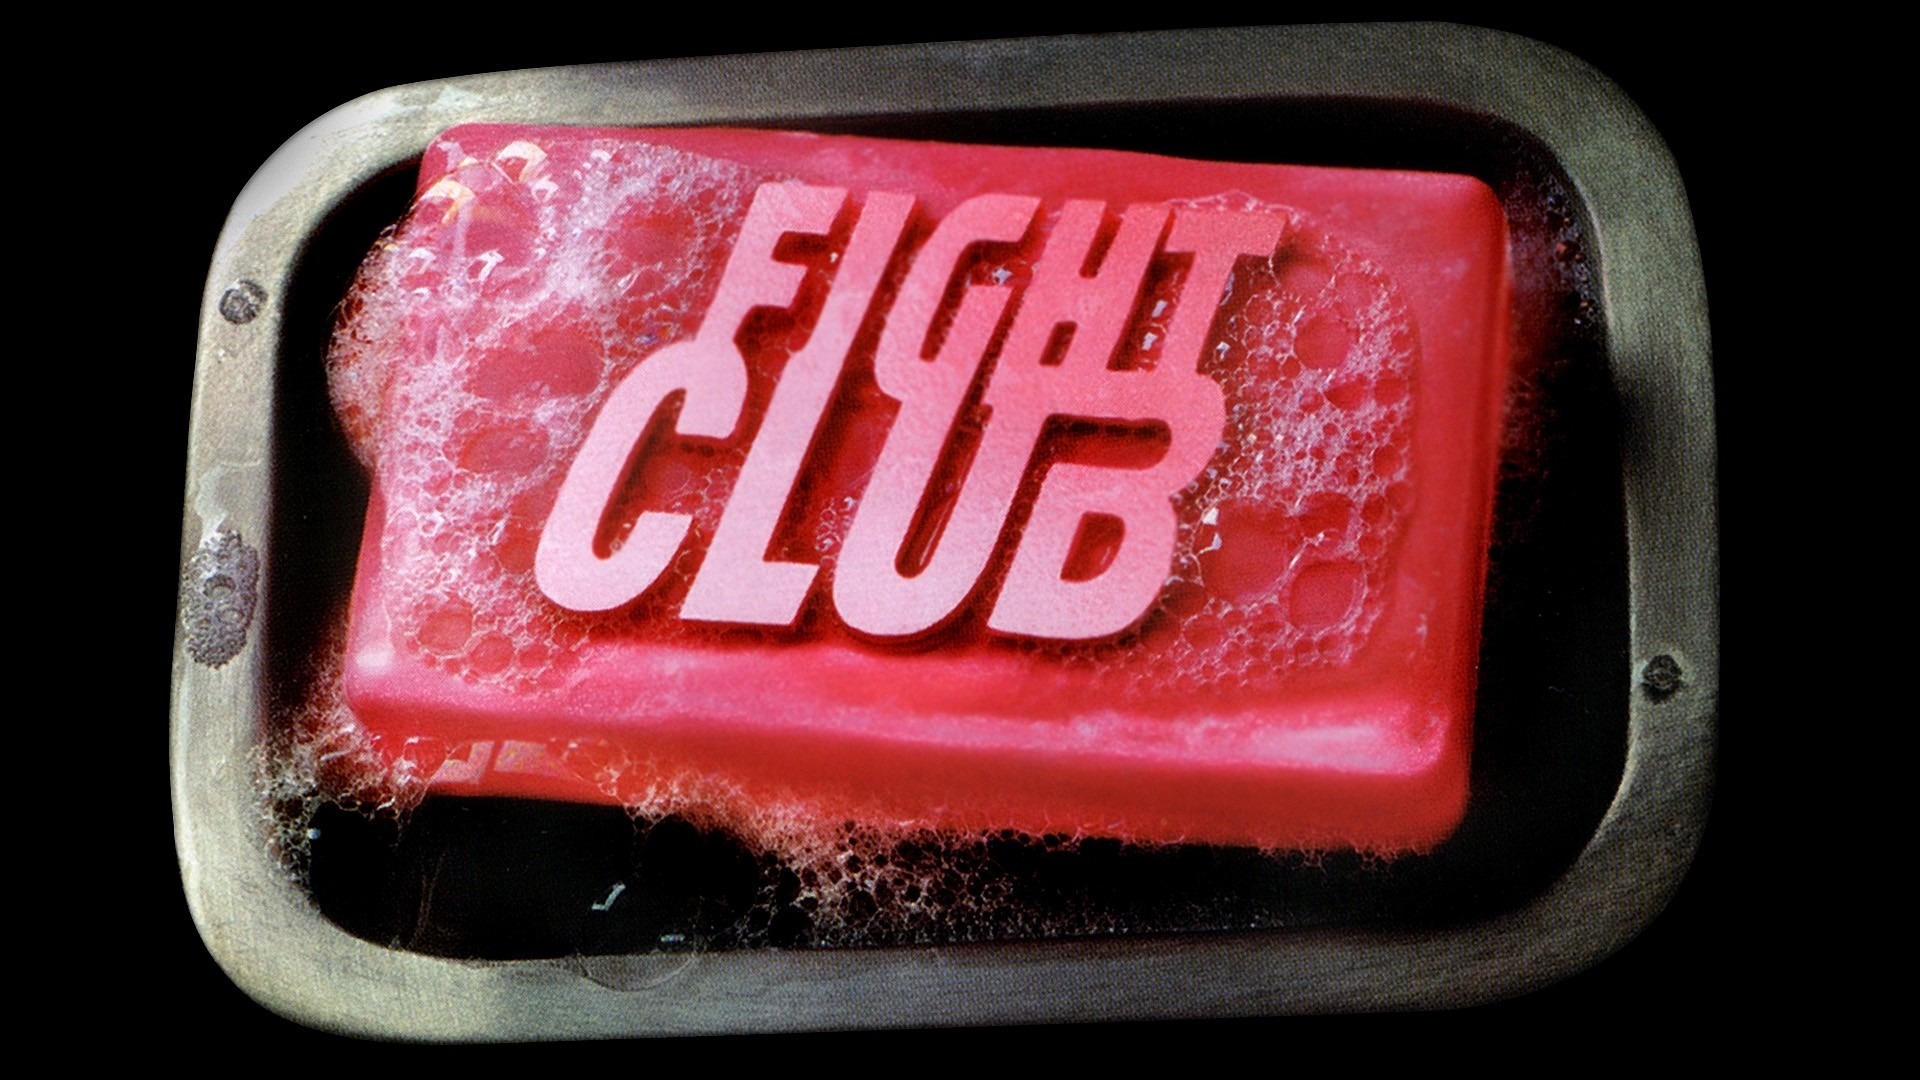 1920x1080 Wallpaper Fight club, Soap, Text, Red